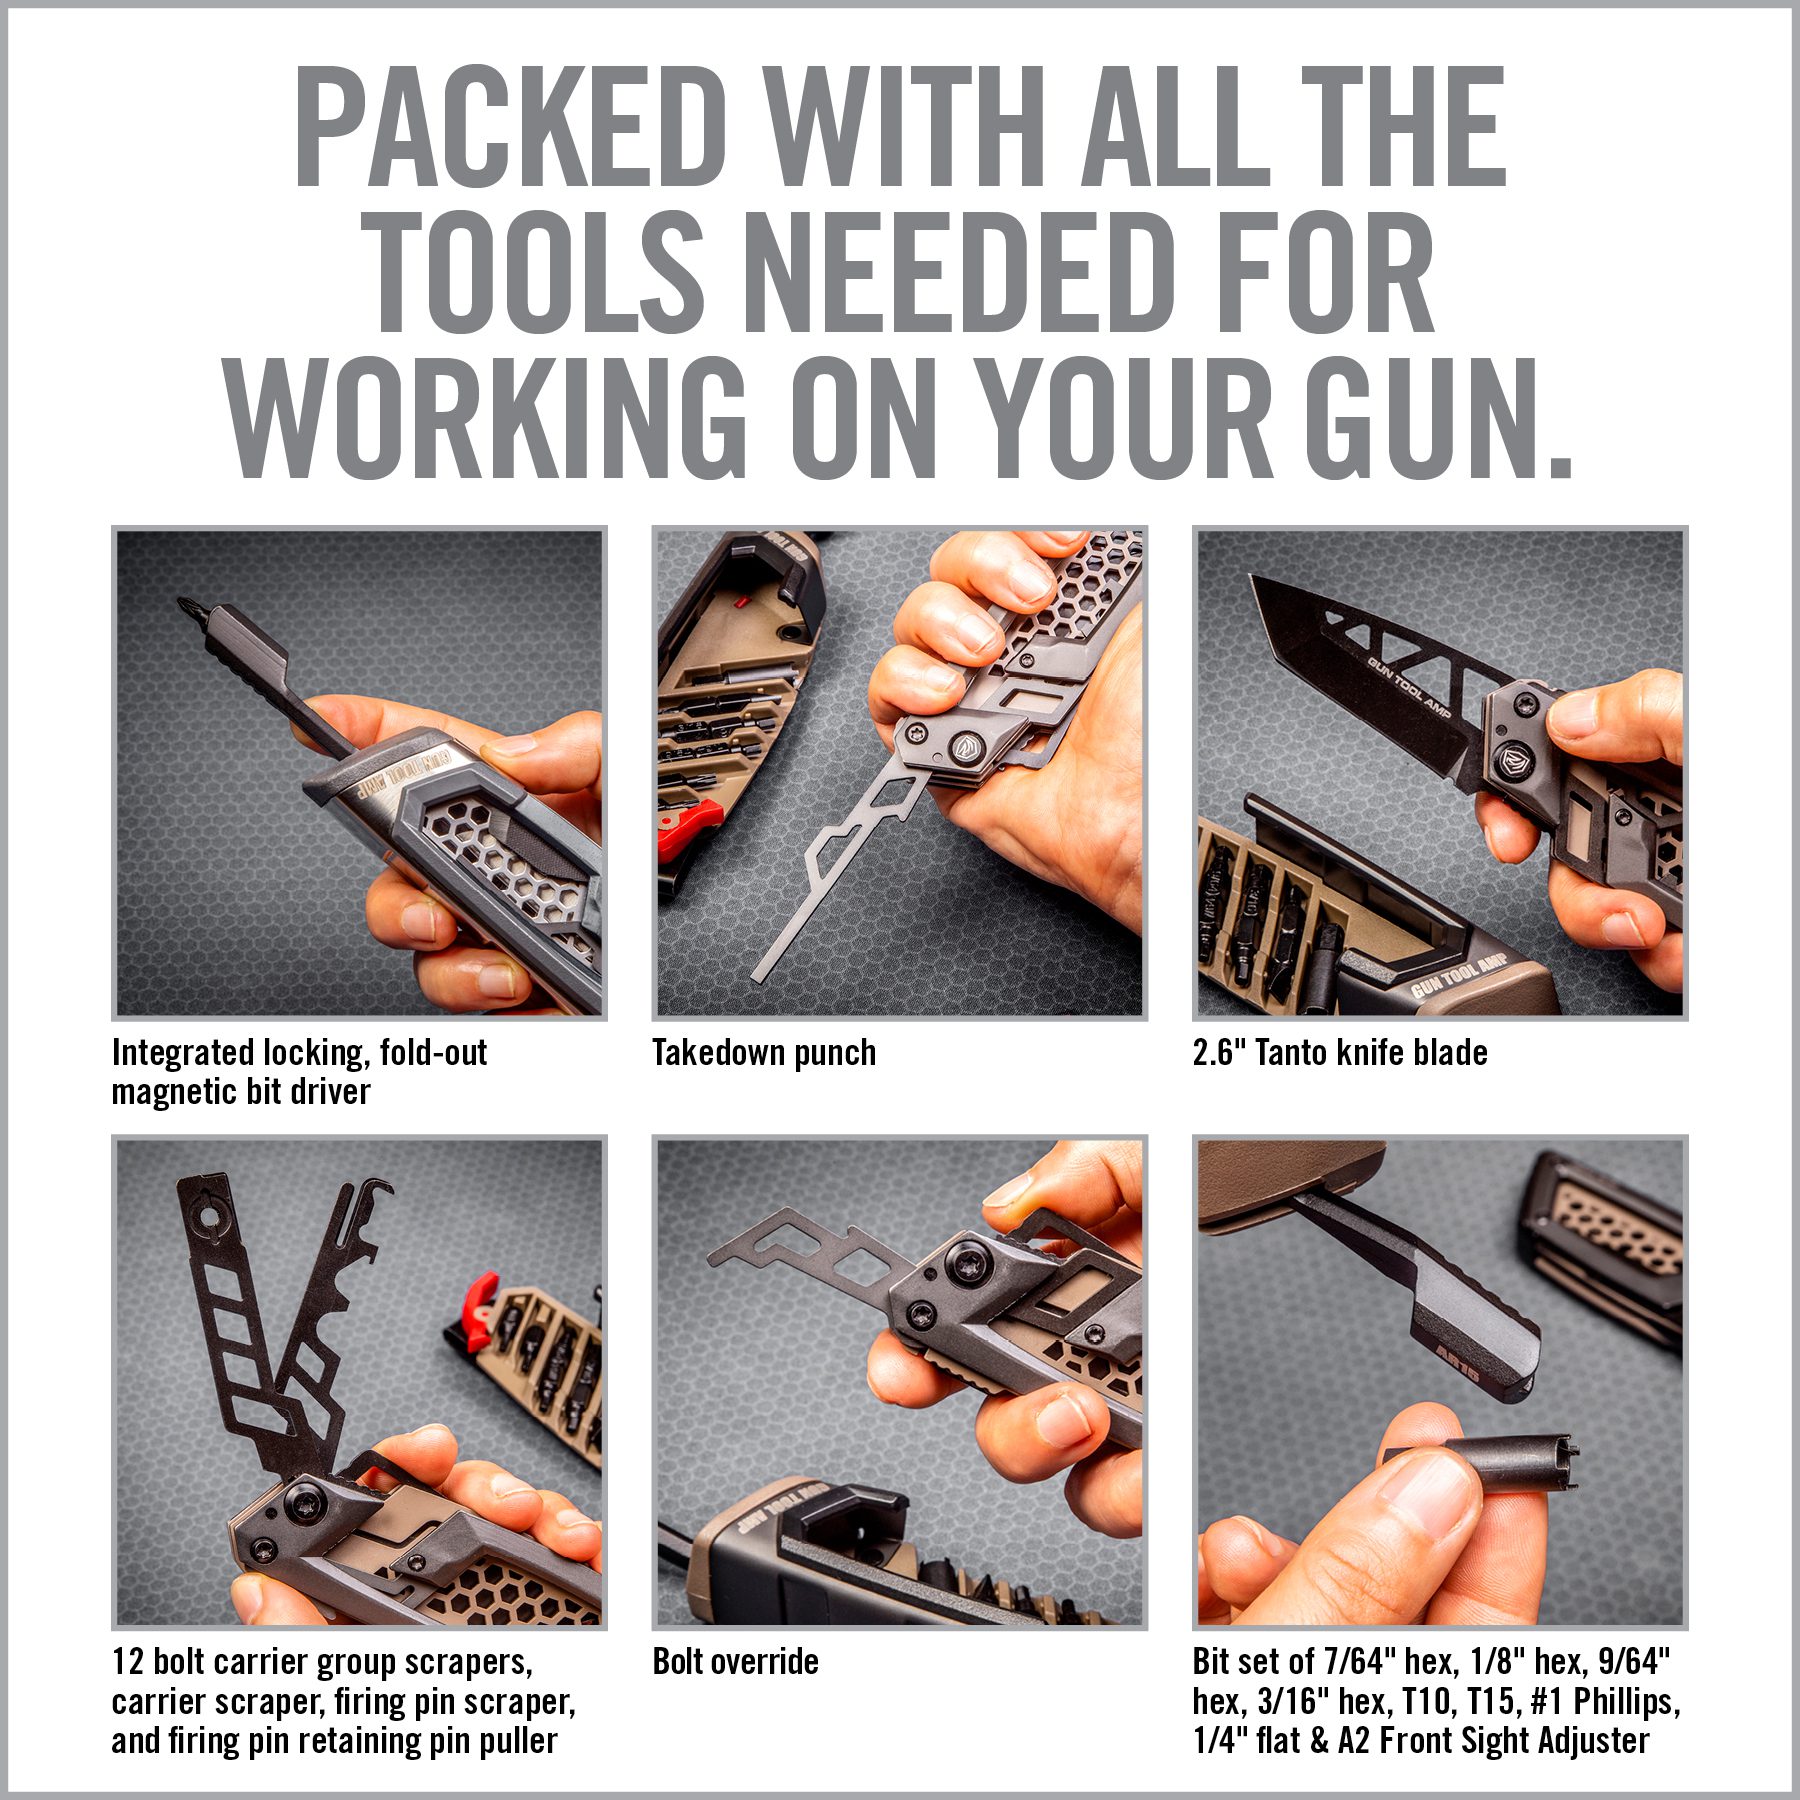 instructions on how to use the tool for working on your gun